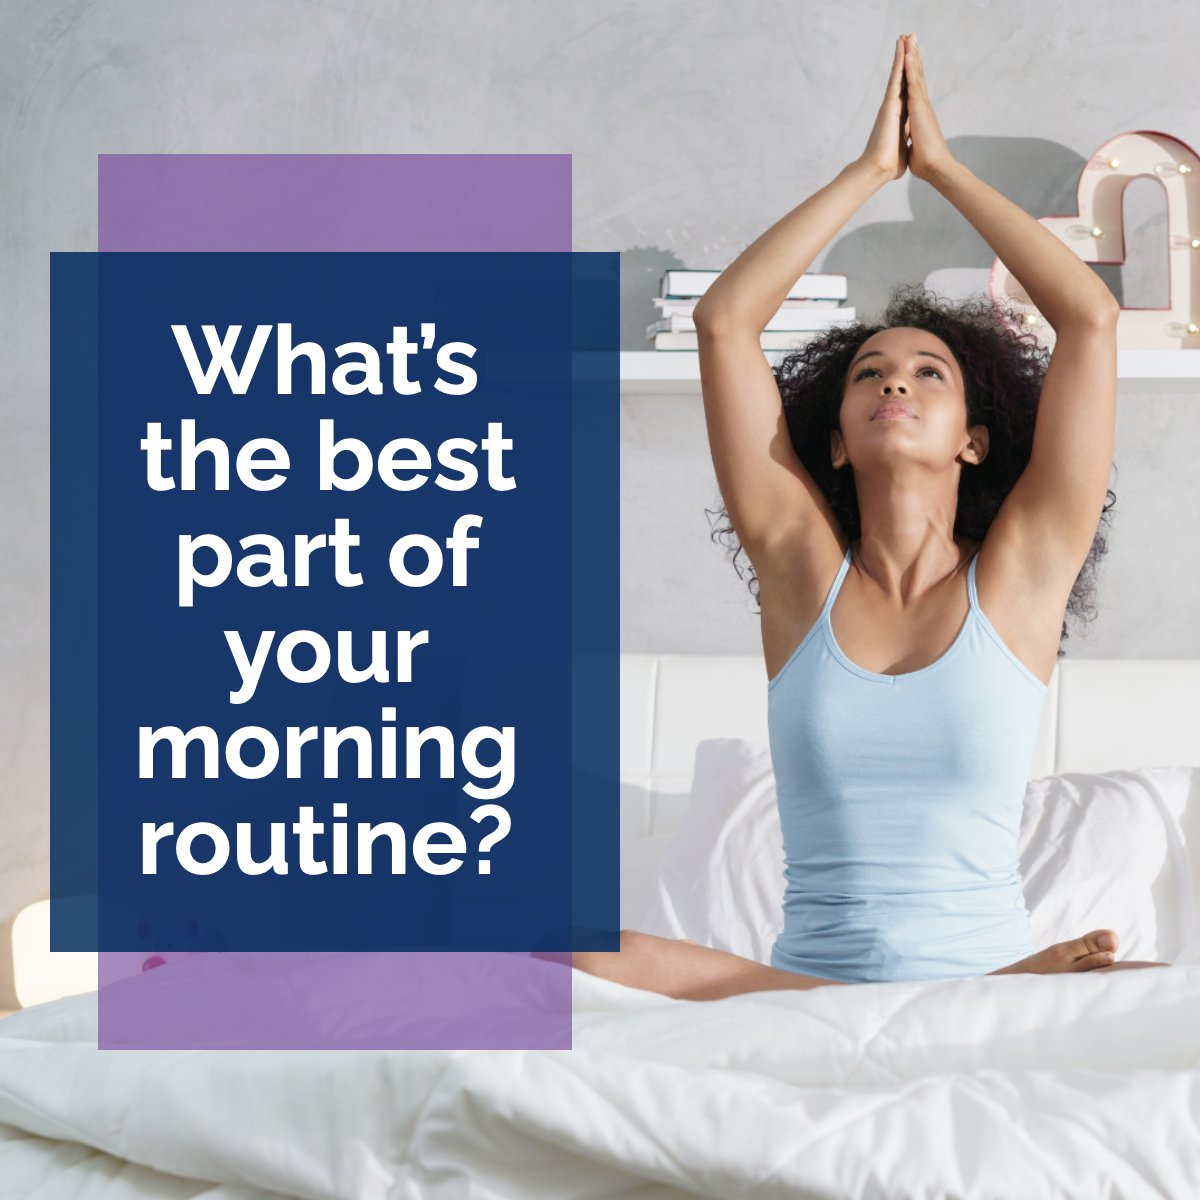 Did someone say... Coffee? ☕

What's the best part of your morning routine?

Tell us below!

#morning    #morningroutine    #wakeup    #bed    #wakingup    #early    #stretch    #yoga    #selfcare
#YourPerfectHome #CRayBrower #SanJoaquinCounty #StocktonCA #RealEstate